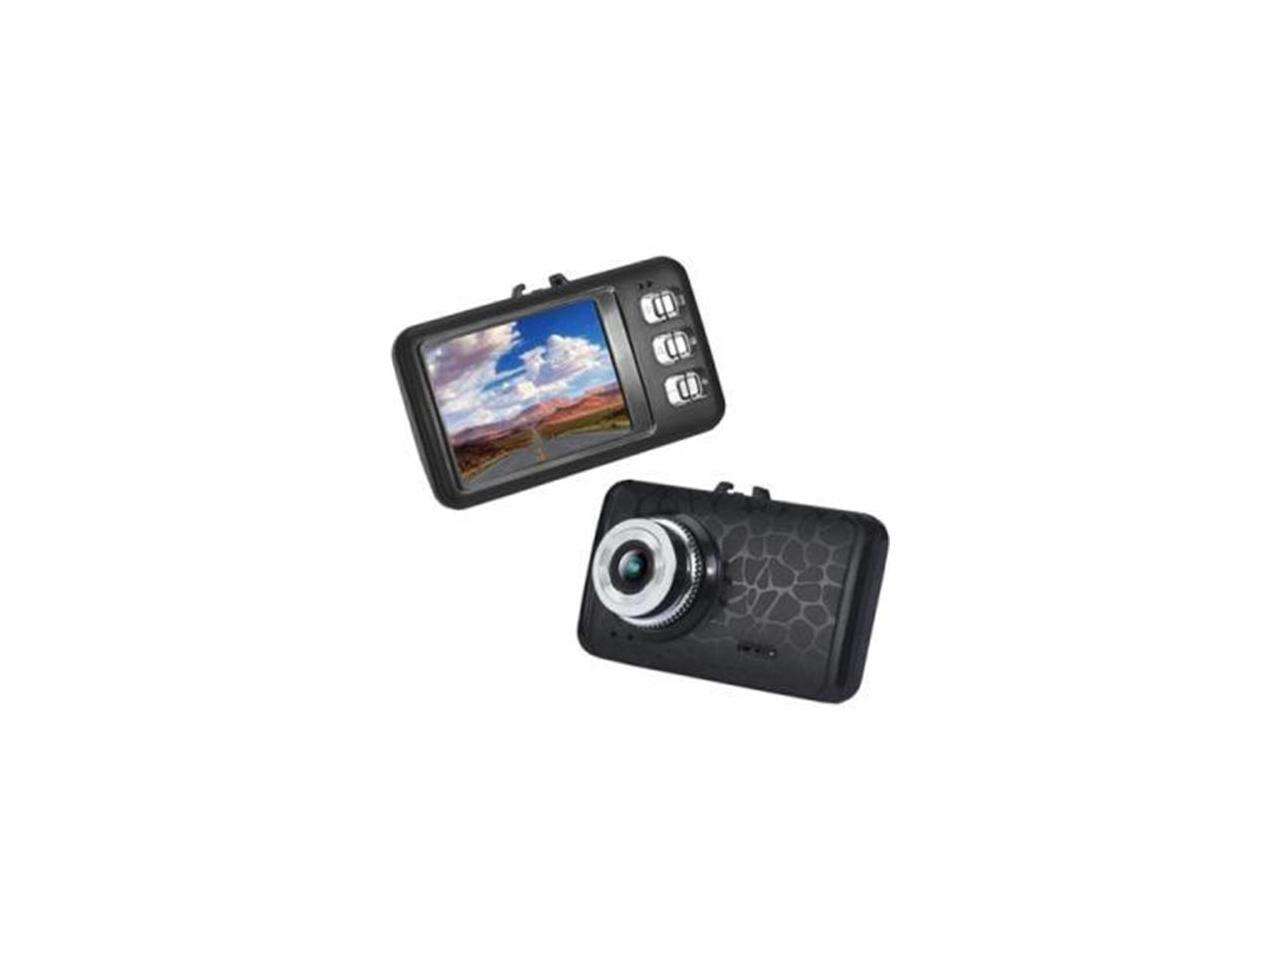 MyePads Digital Camcorder with 2.4